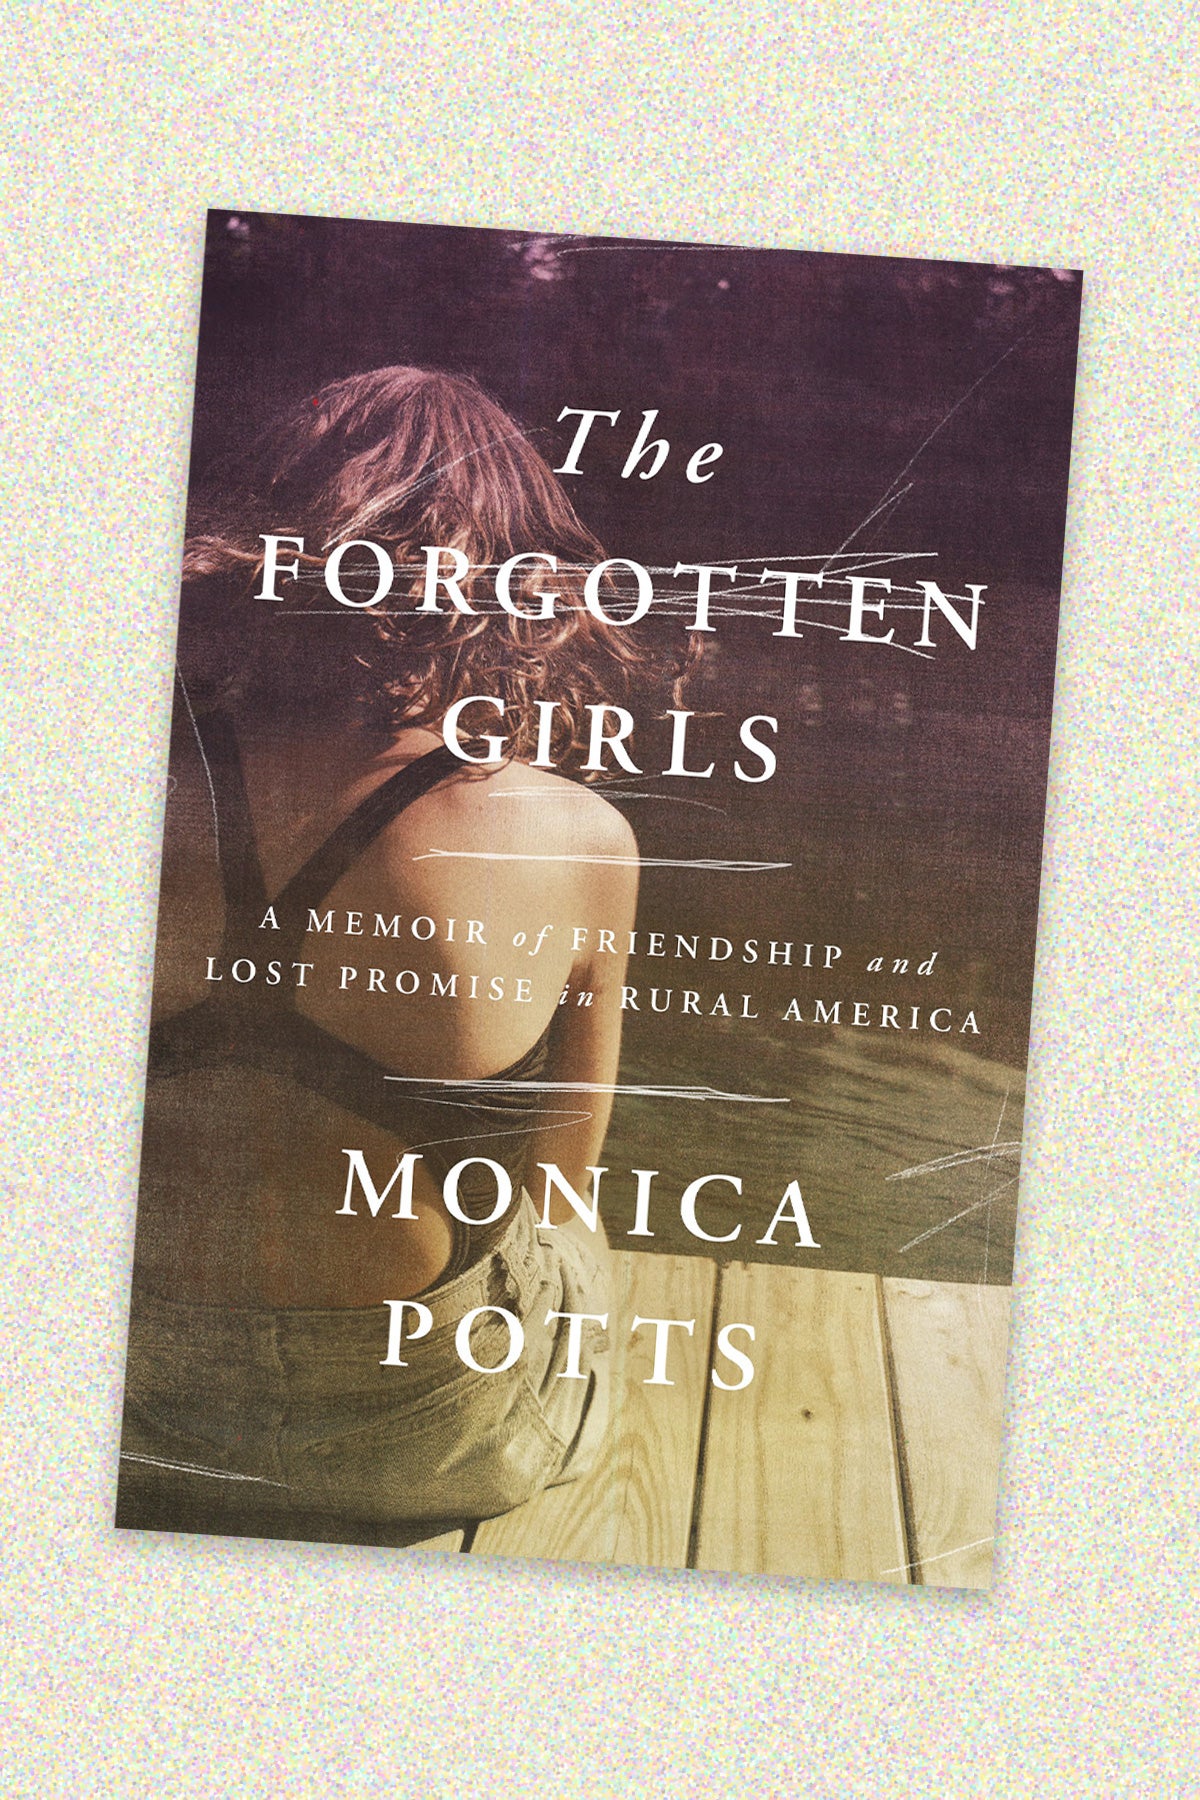 Book cover of “The Forgotten Girls: A Memoir of Friendship and lost promise in Rural America” by Monica Potts. The book cover shows the back of a female teen sitting on a dock wearing a one-piece swimsuit and jean shorts. The book cover sits on a light beige and pink-speckled background.